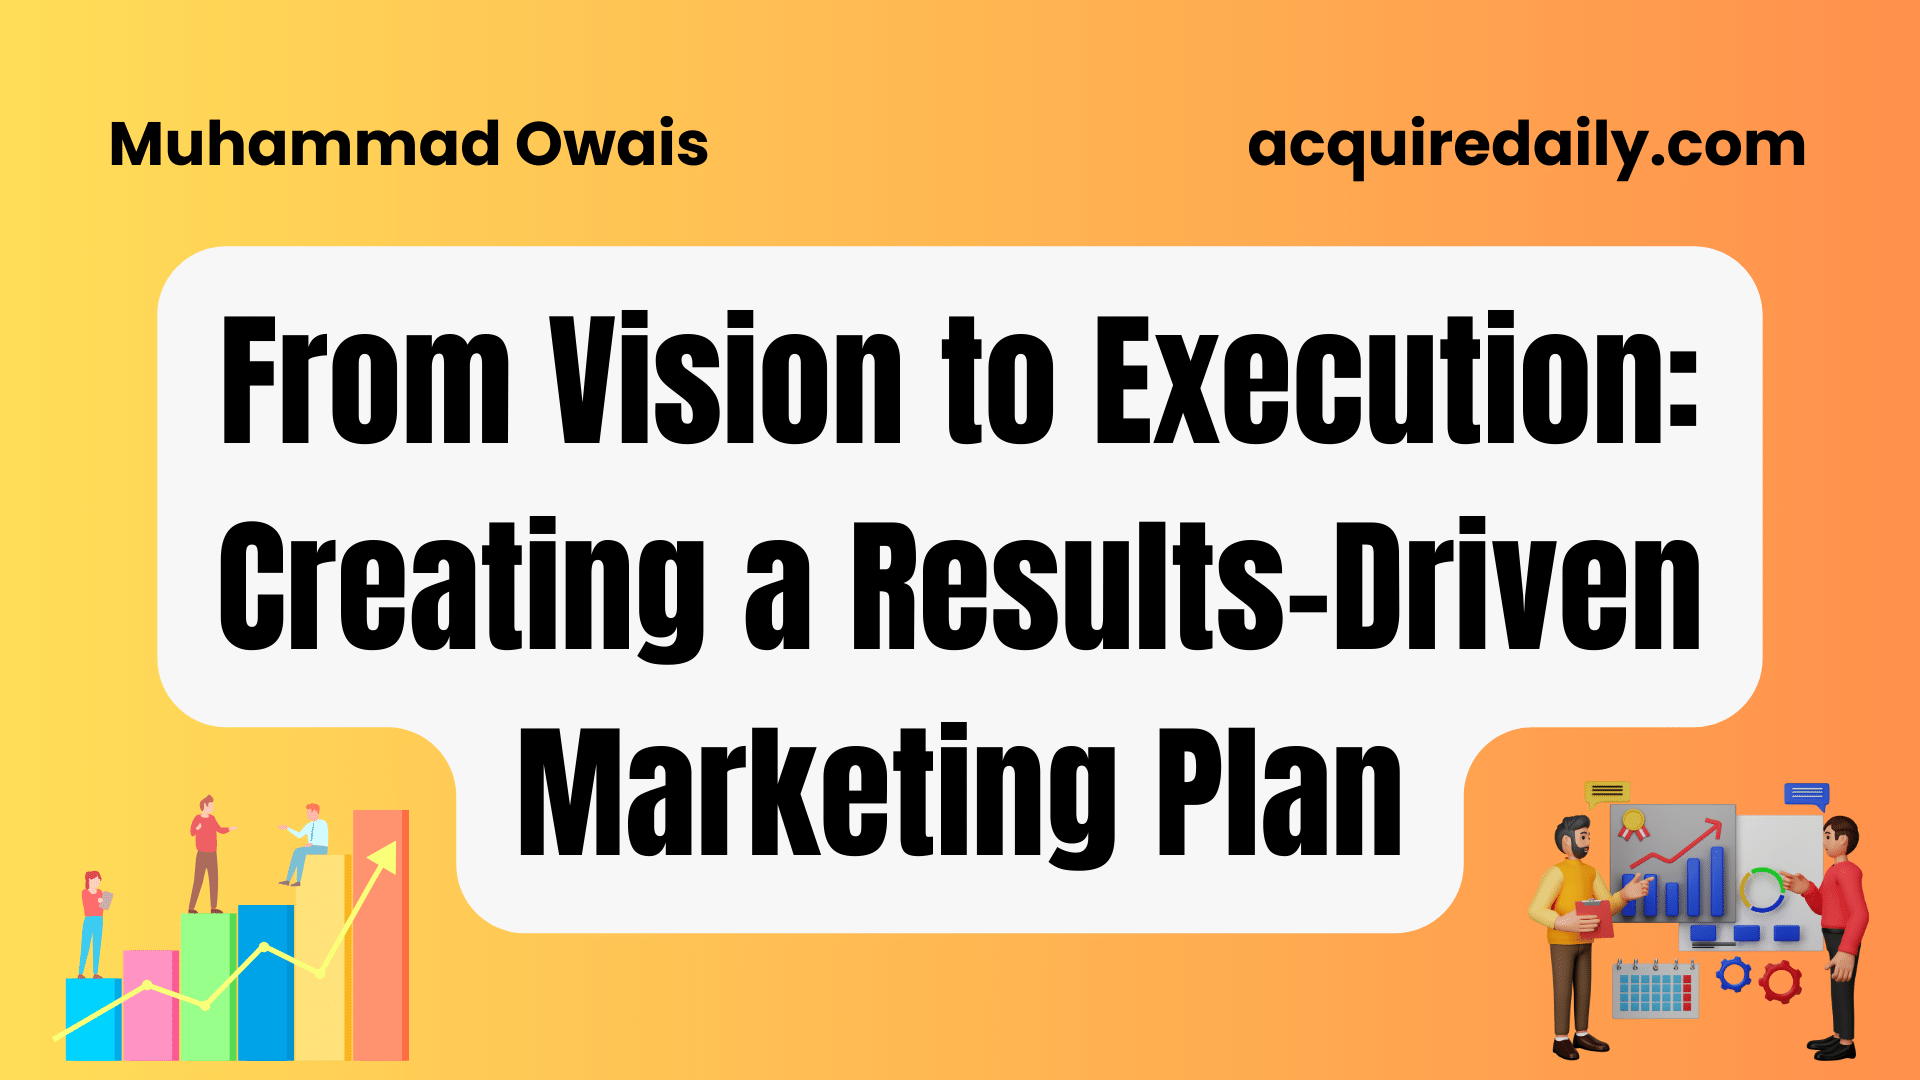 From Vision to Execution: Creating a Results-Driven Marketing Plan - Acquire Daily